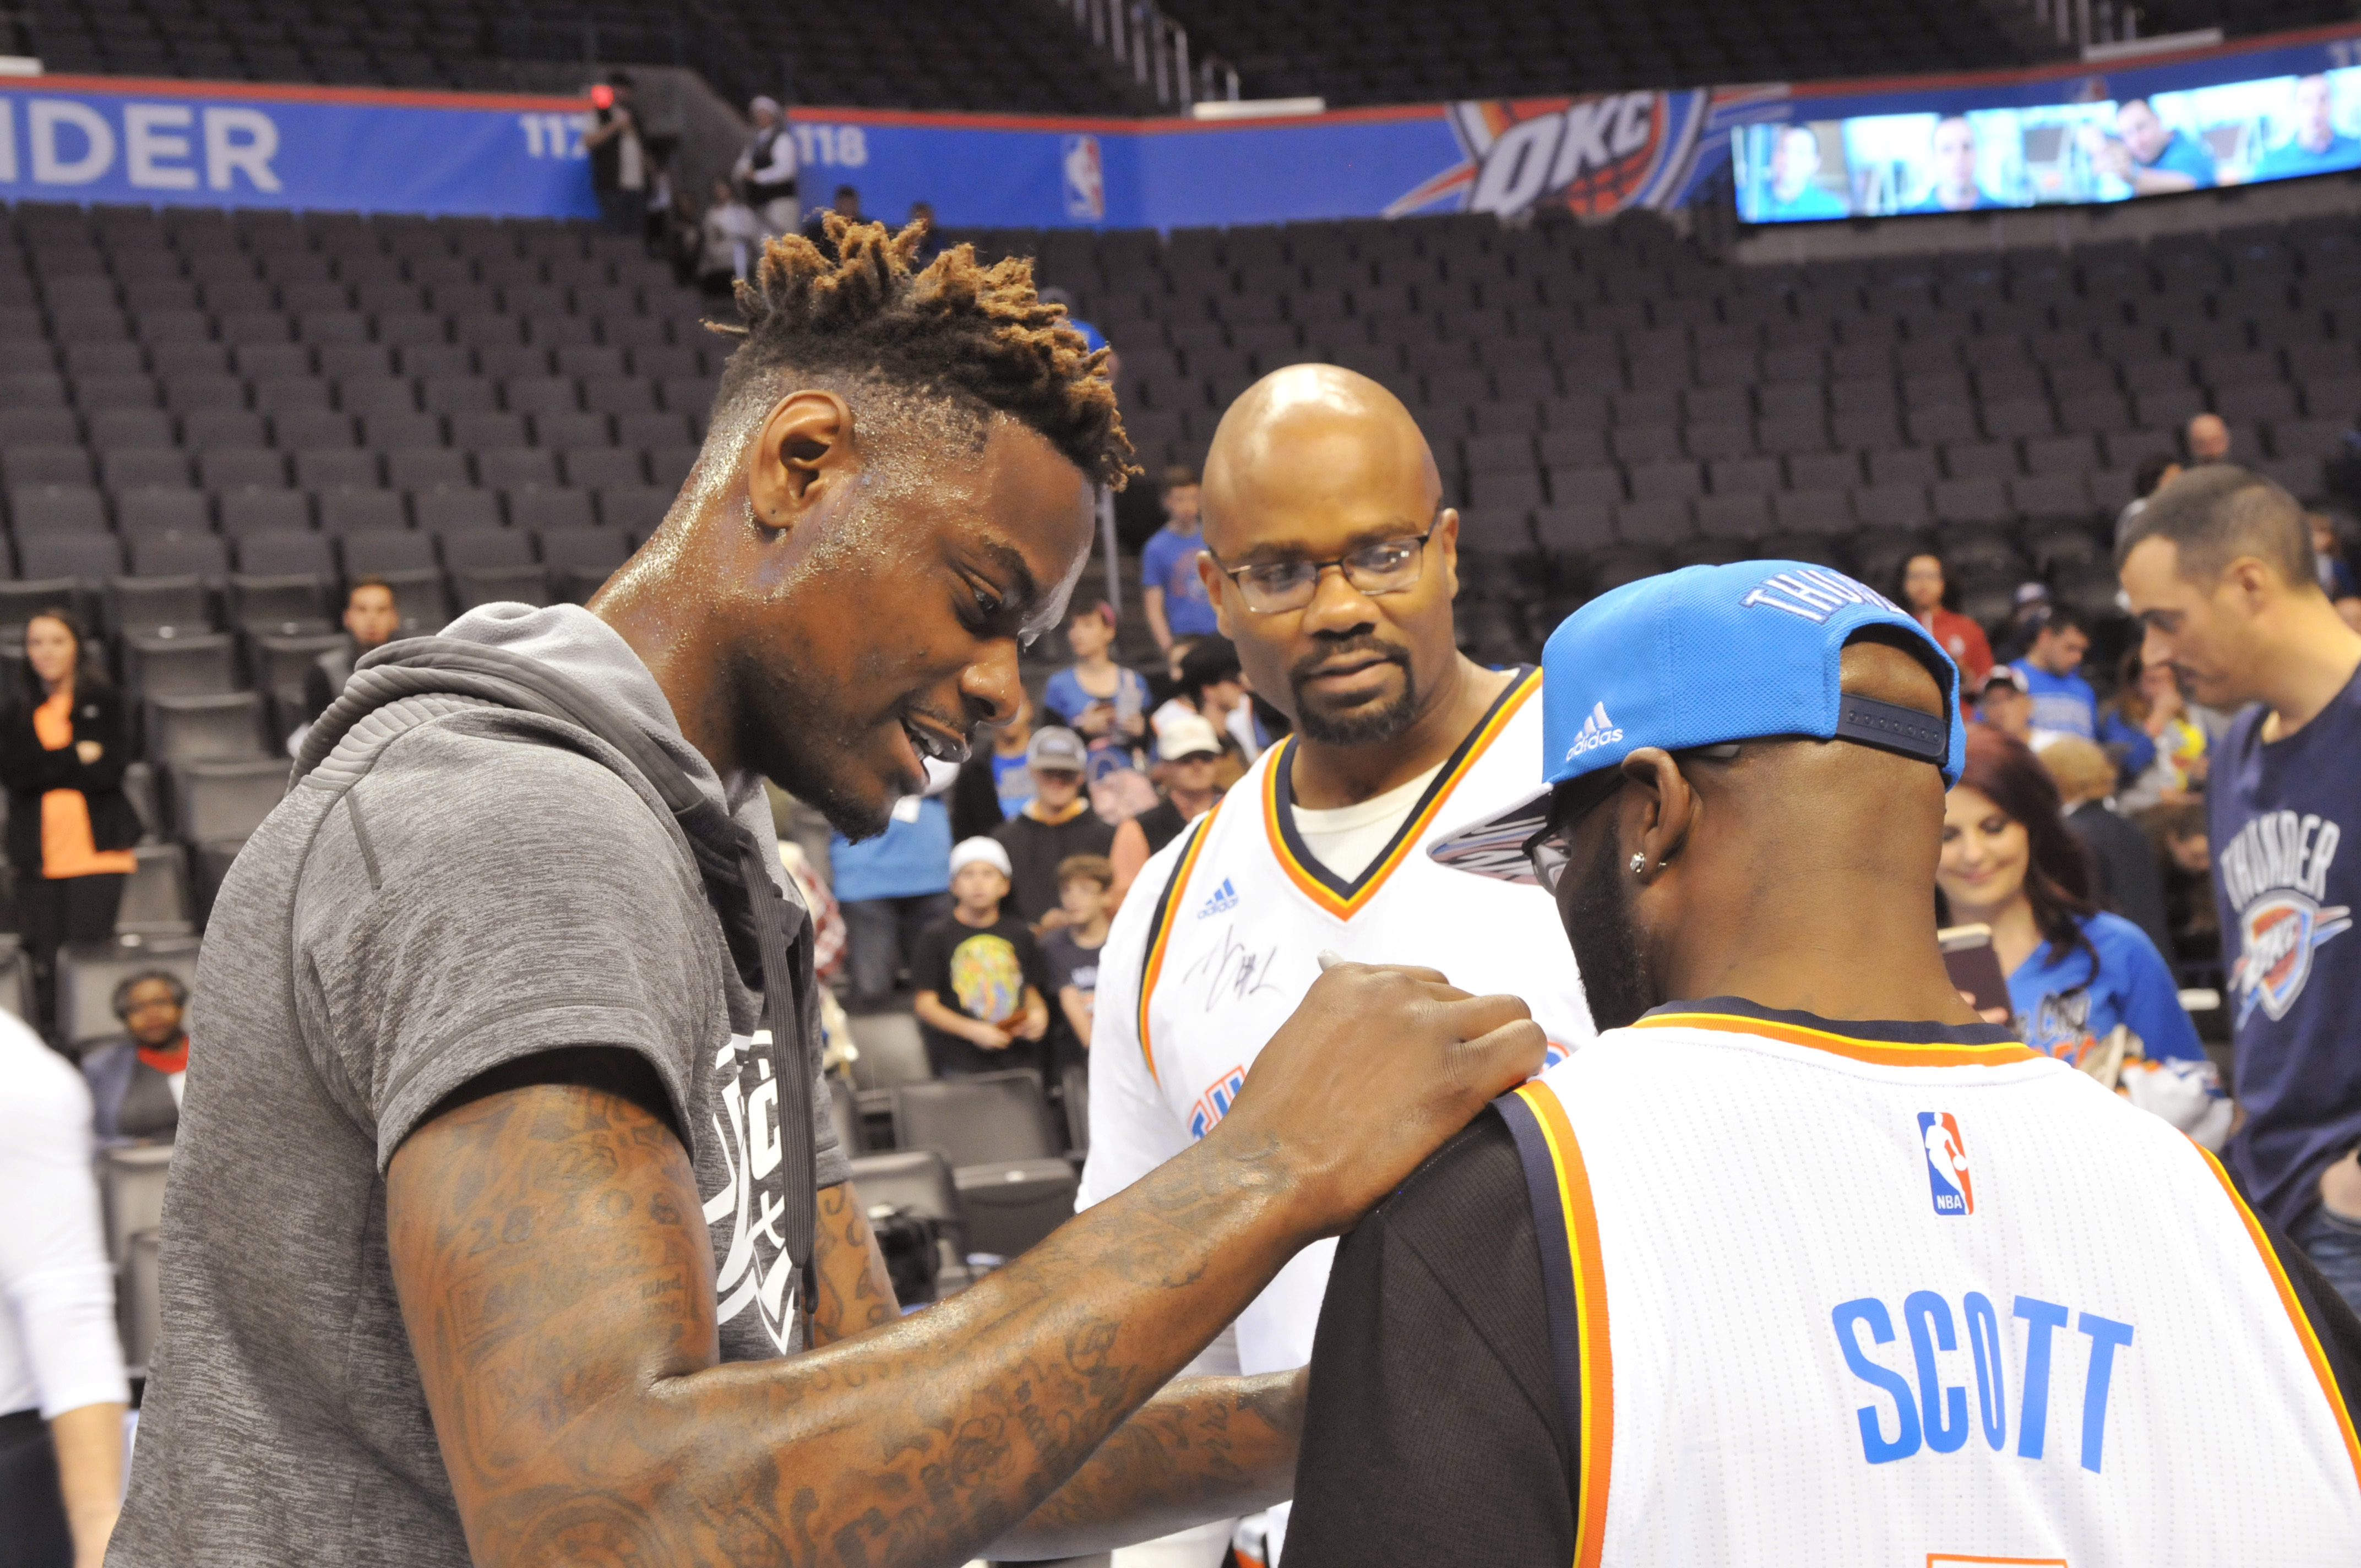 The Thunder's Anthony Morrow signs Malcolm Scott's jersey. Photo by Michael Downes